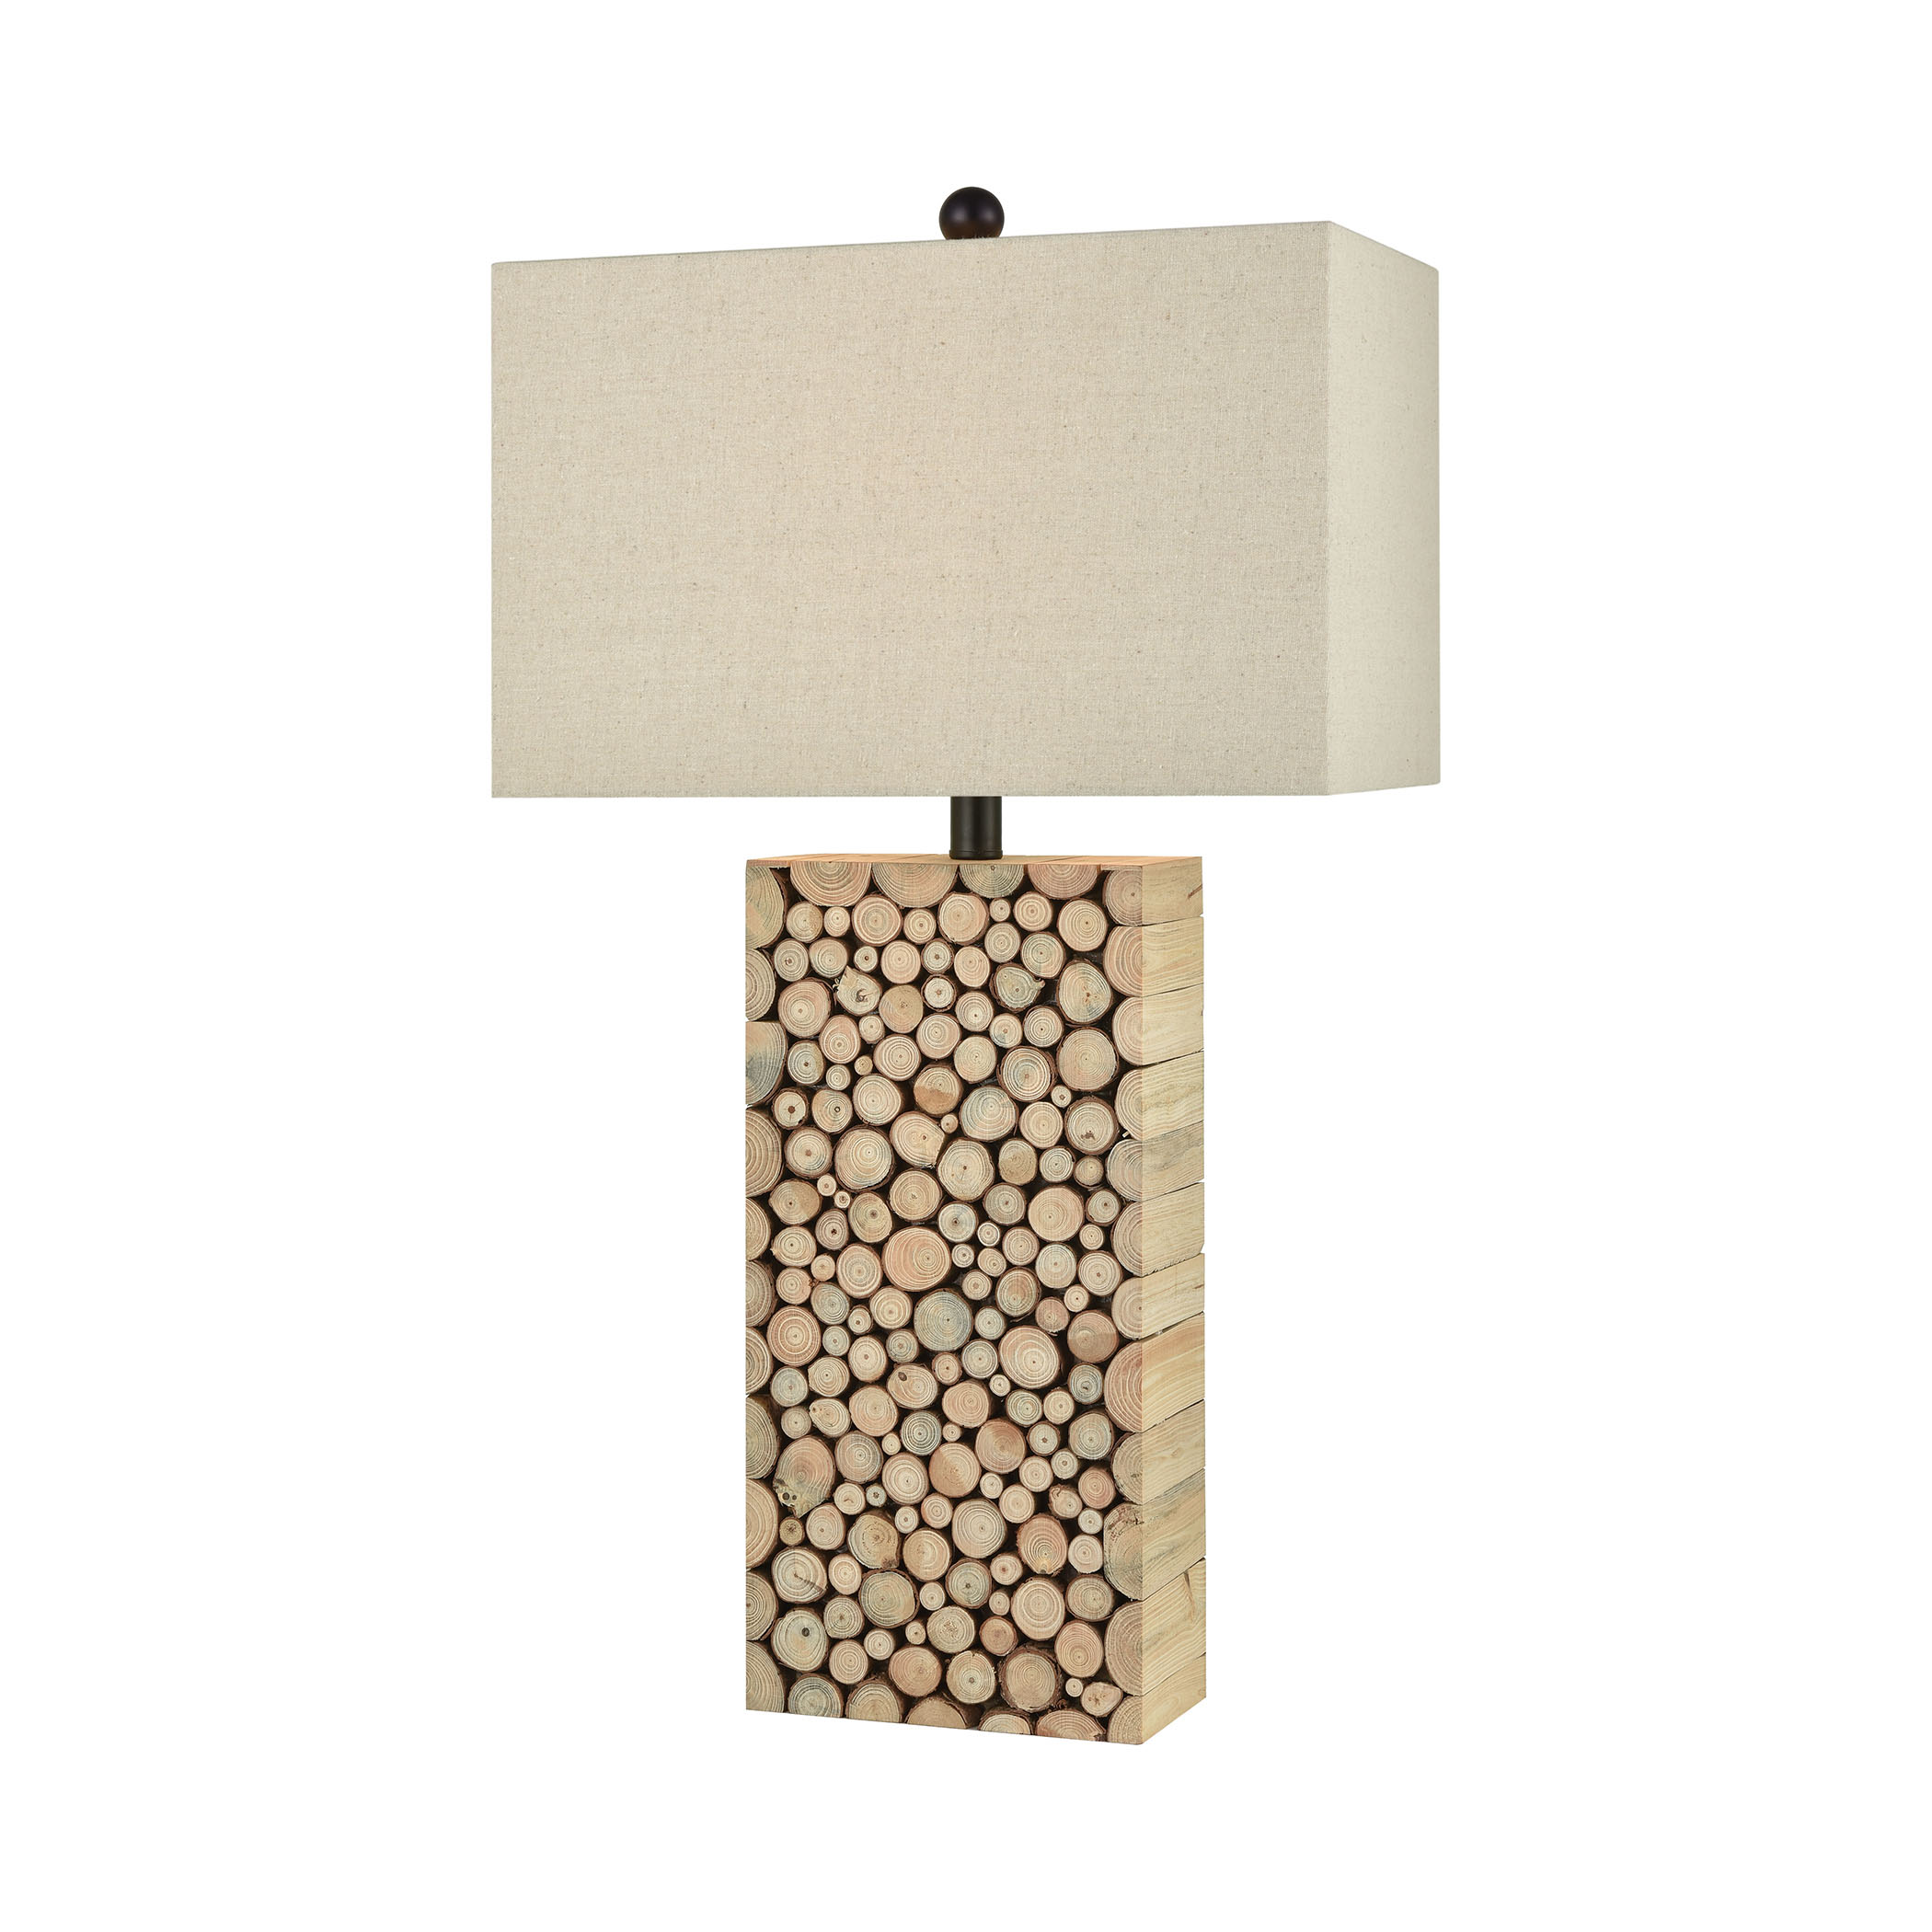 Stein-World-Clearcut-table-lamp